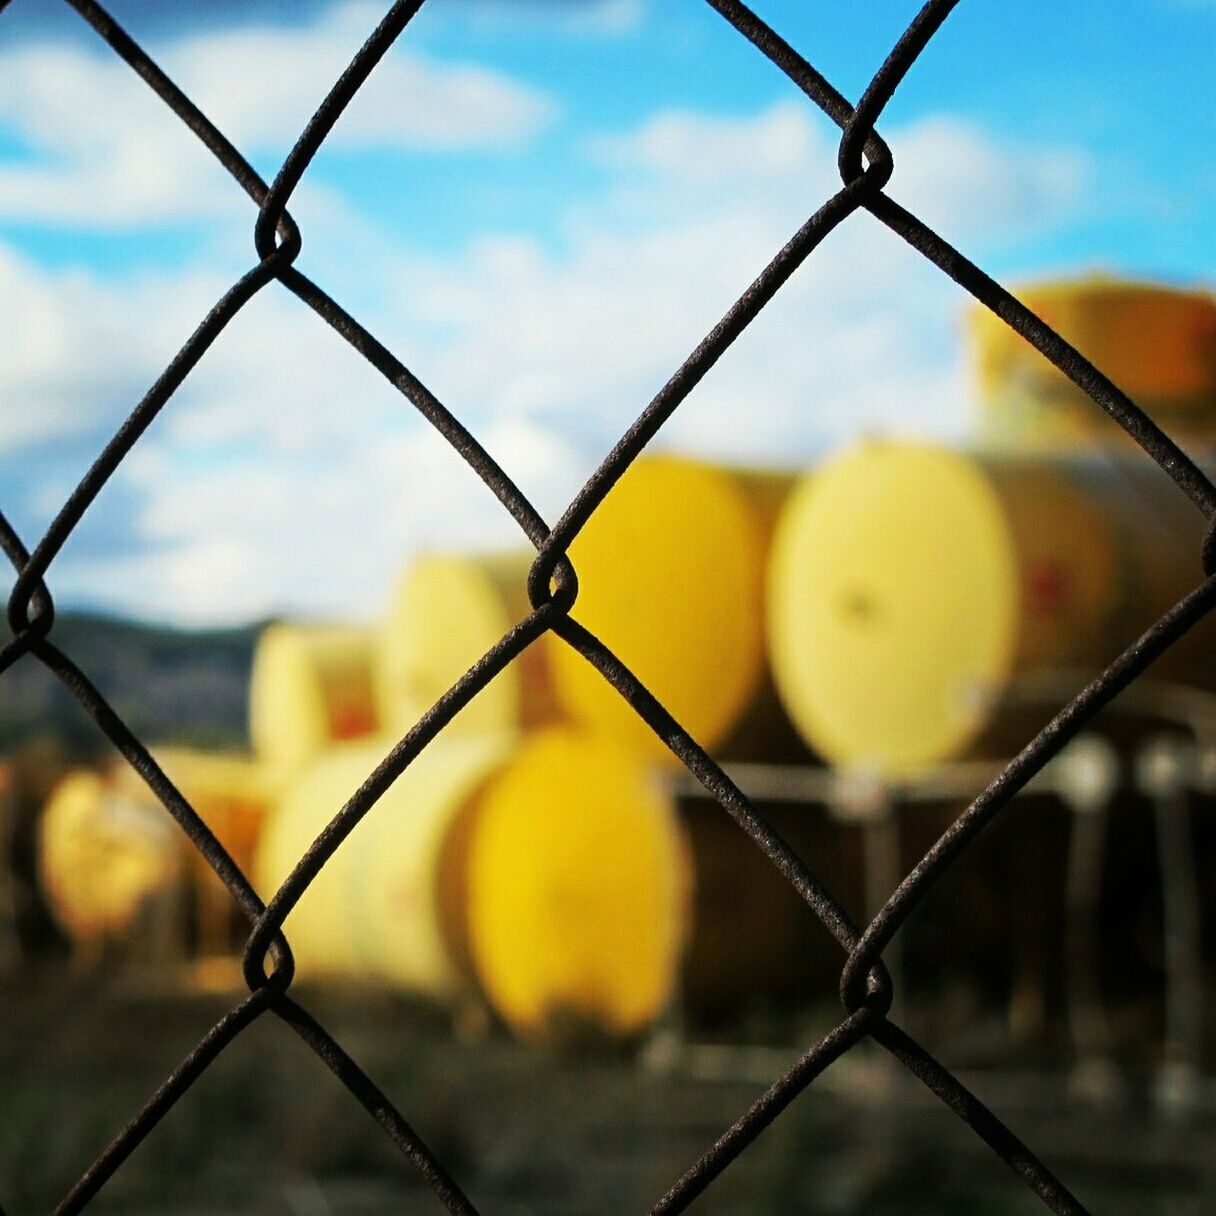 chainlink fence, protection, safety, fence, focus on foreground, security, yellow, metal, sky, close-up, full frame, pattern, backgrounds, outdoors, no people, day, sunset, nature, forbidden, cloud - sky